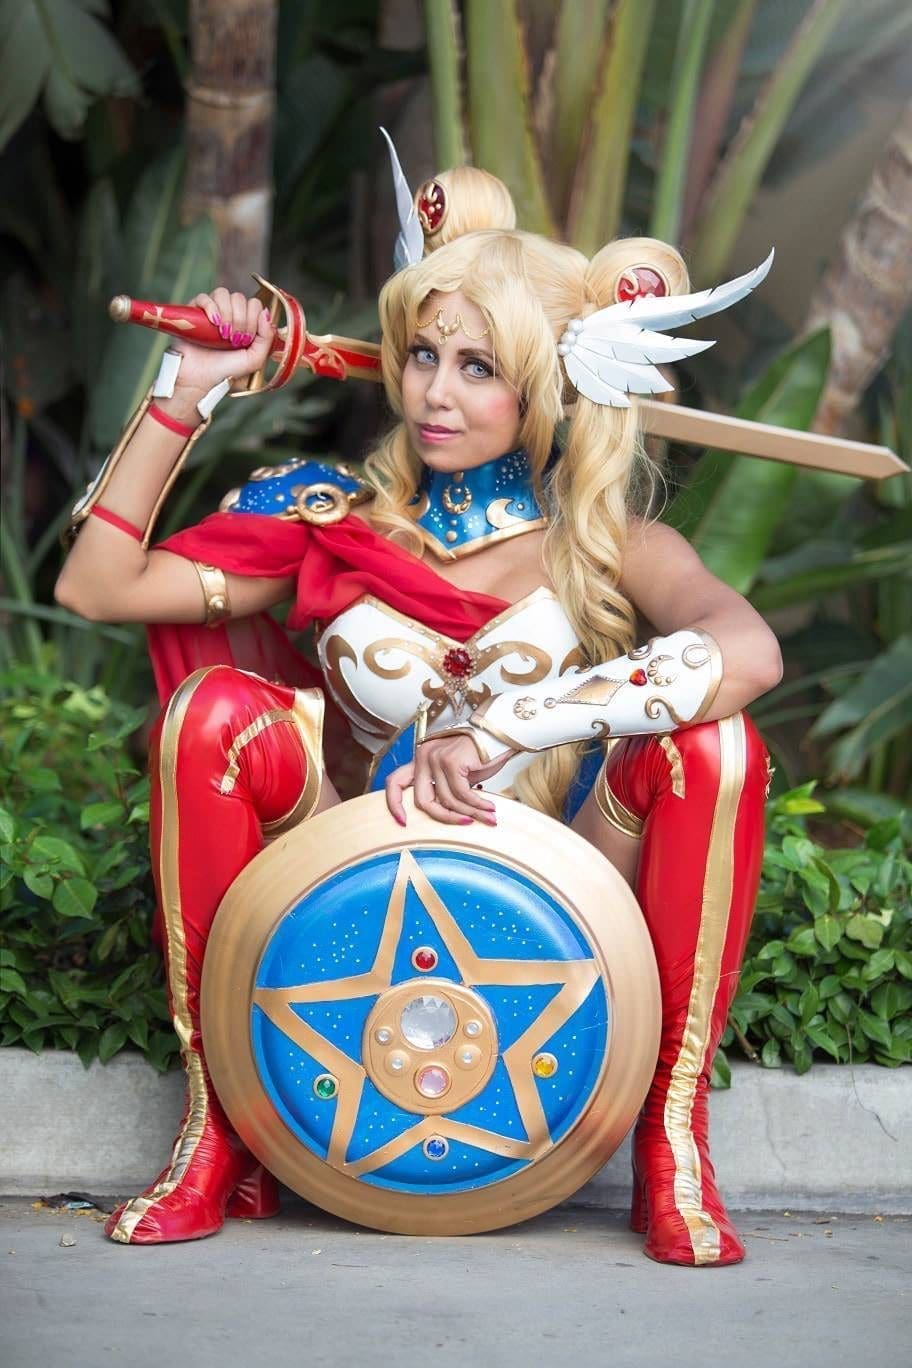 anime expo, AX, AX 2017, cosplay, cosplay corner, cosplayers, interview, photos